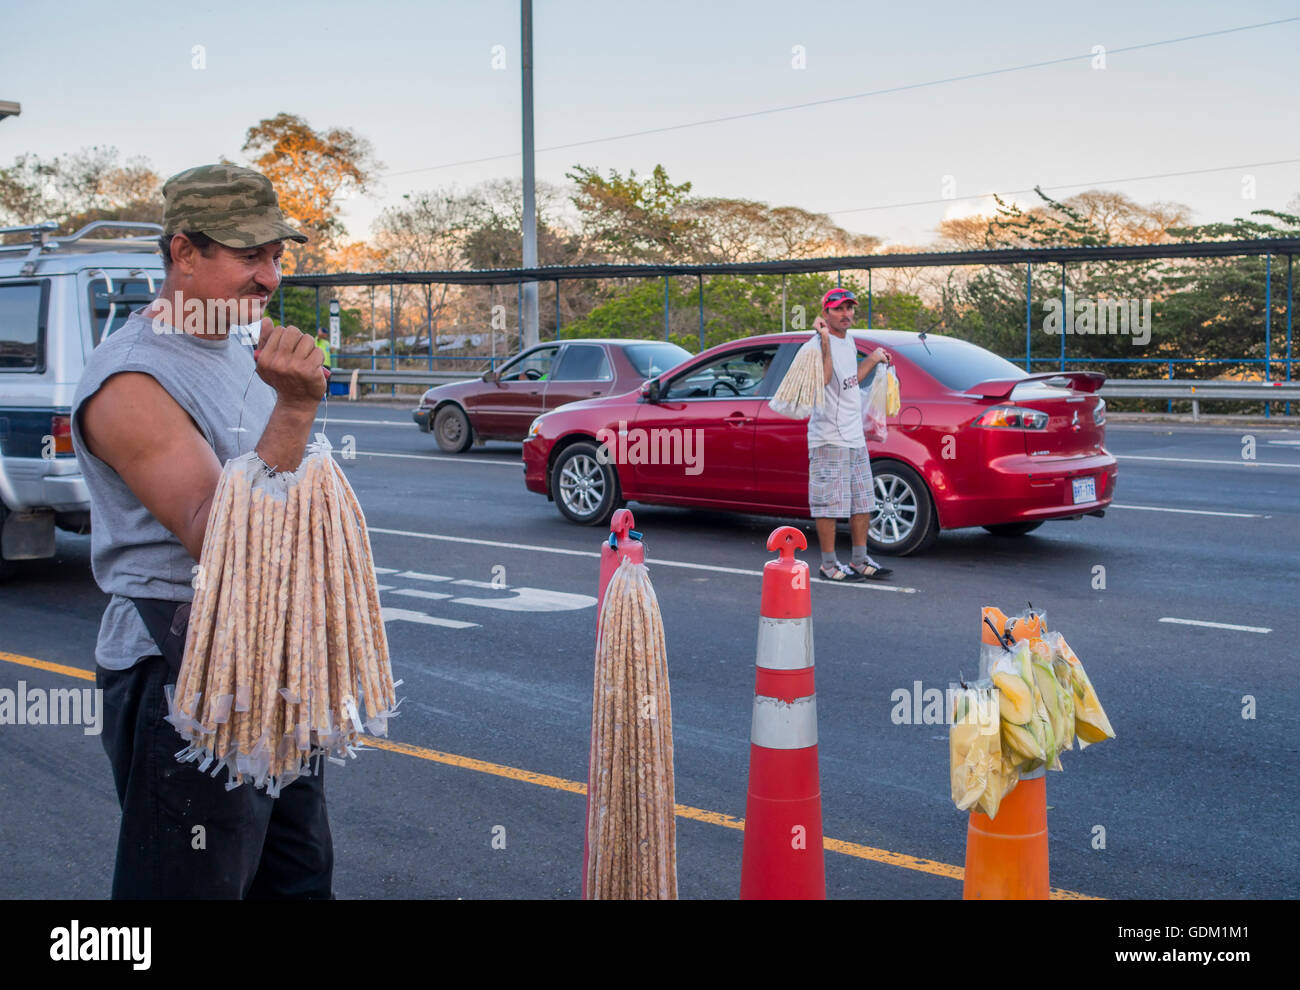 Hawkers selling cashews and dried fruit at a toll booth stop along Highway 27 (Autopista José Maria Castro Madriz). Stock Photo